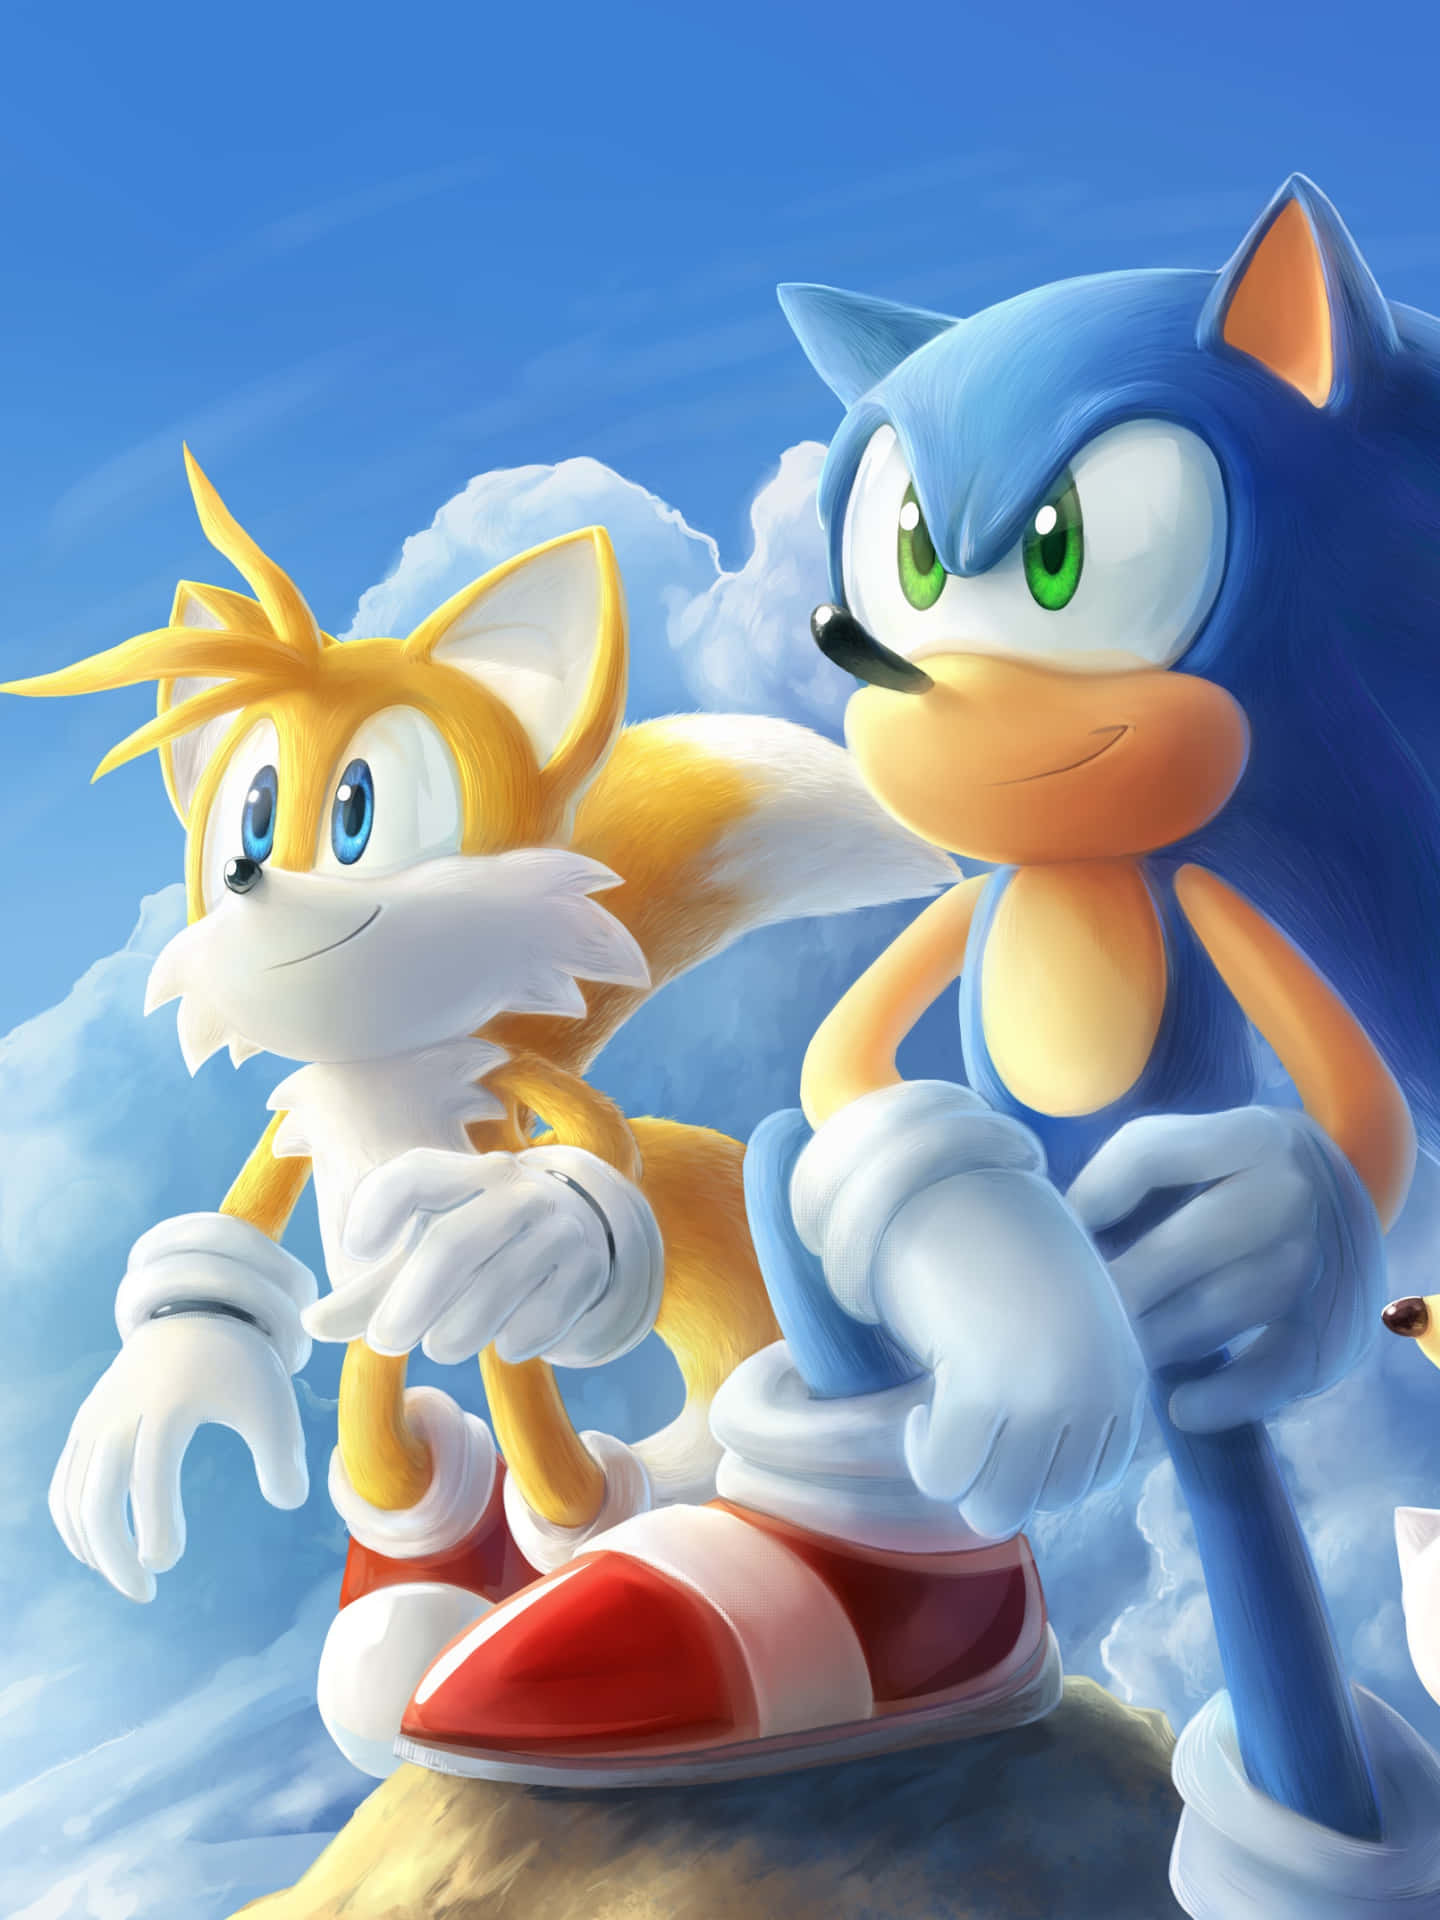 "Adventure awaits - get ready to explore with Tails!" Wallpaper